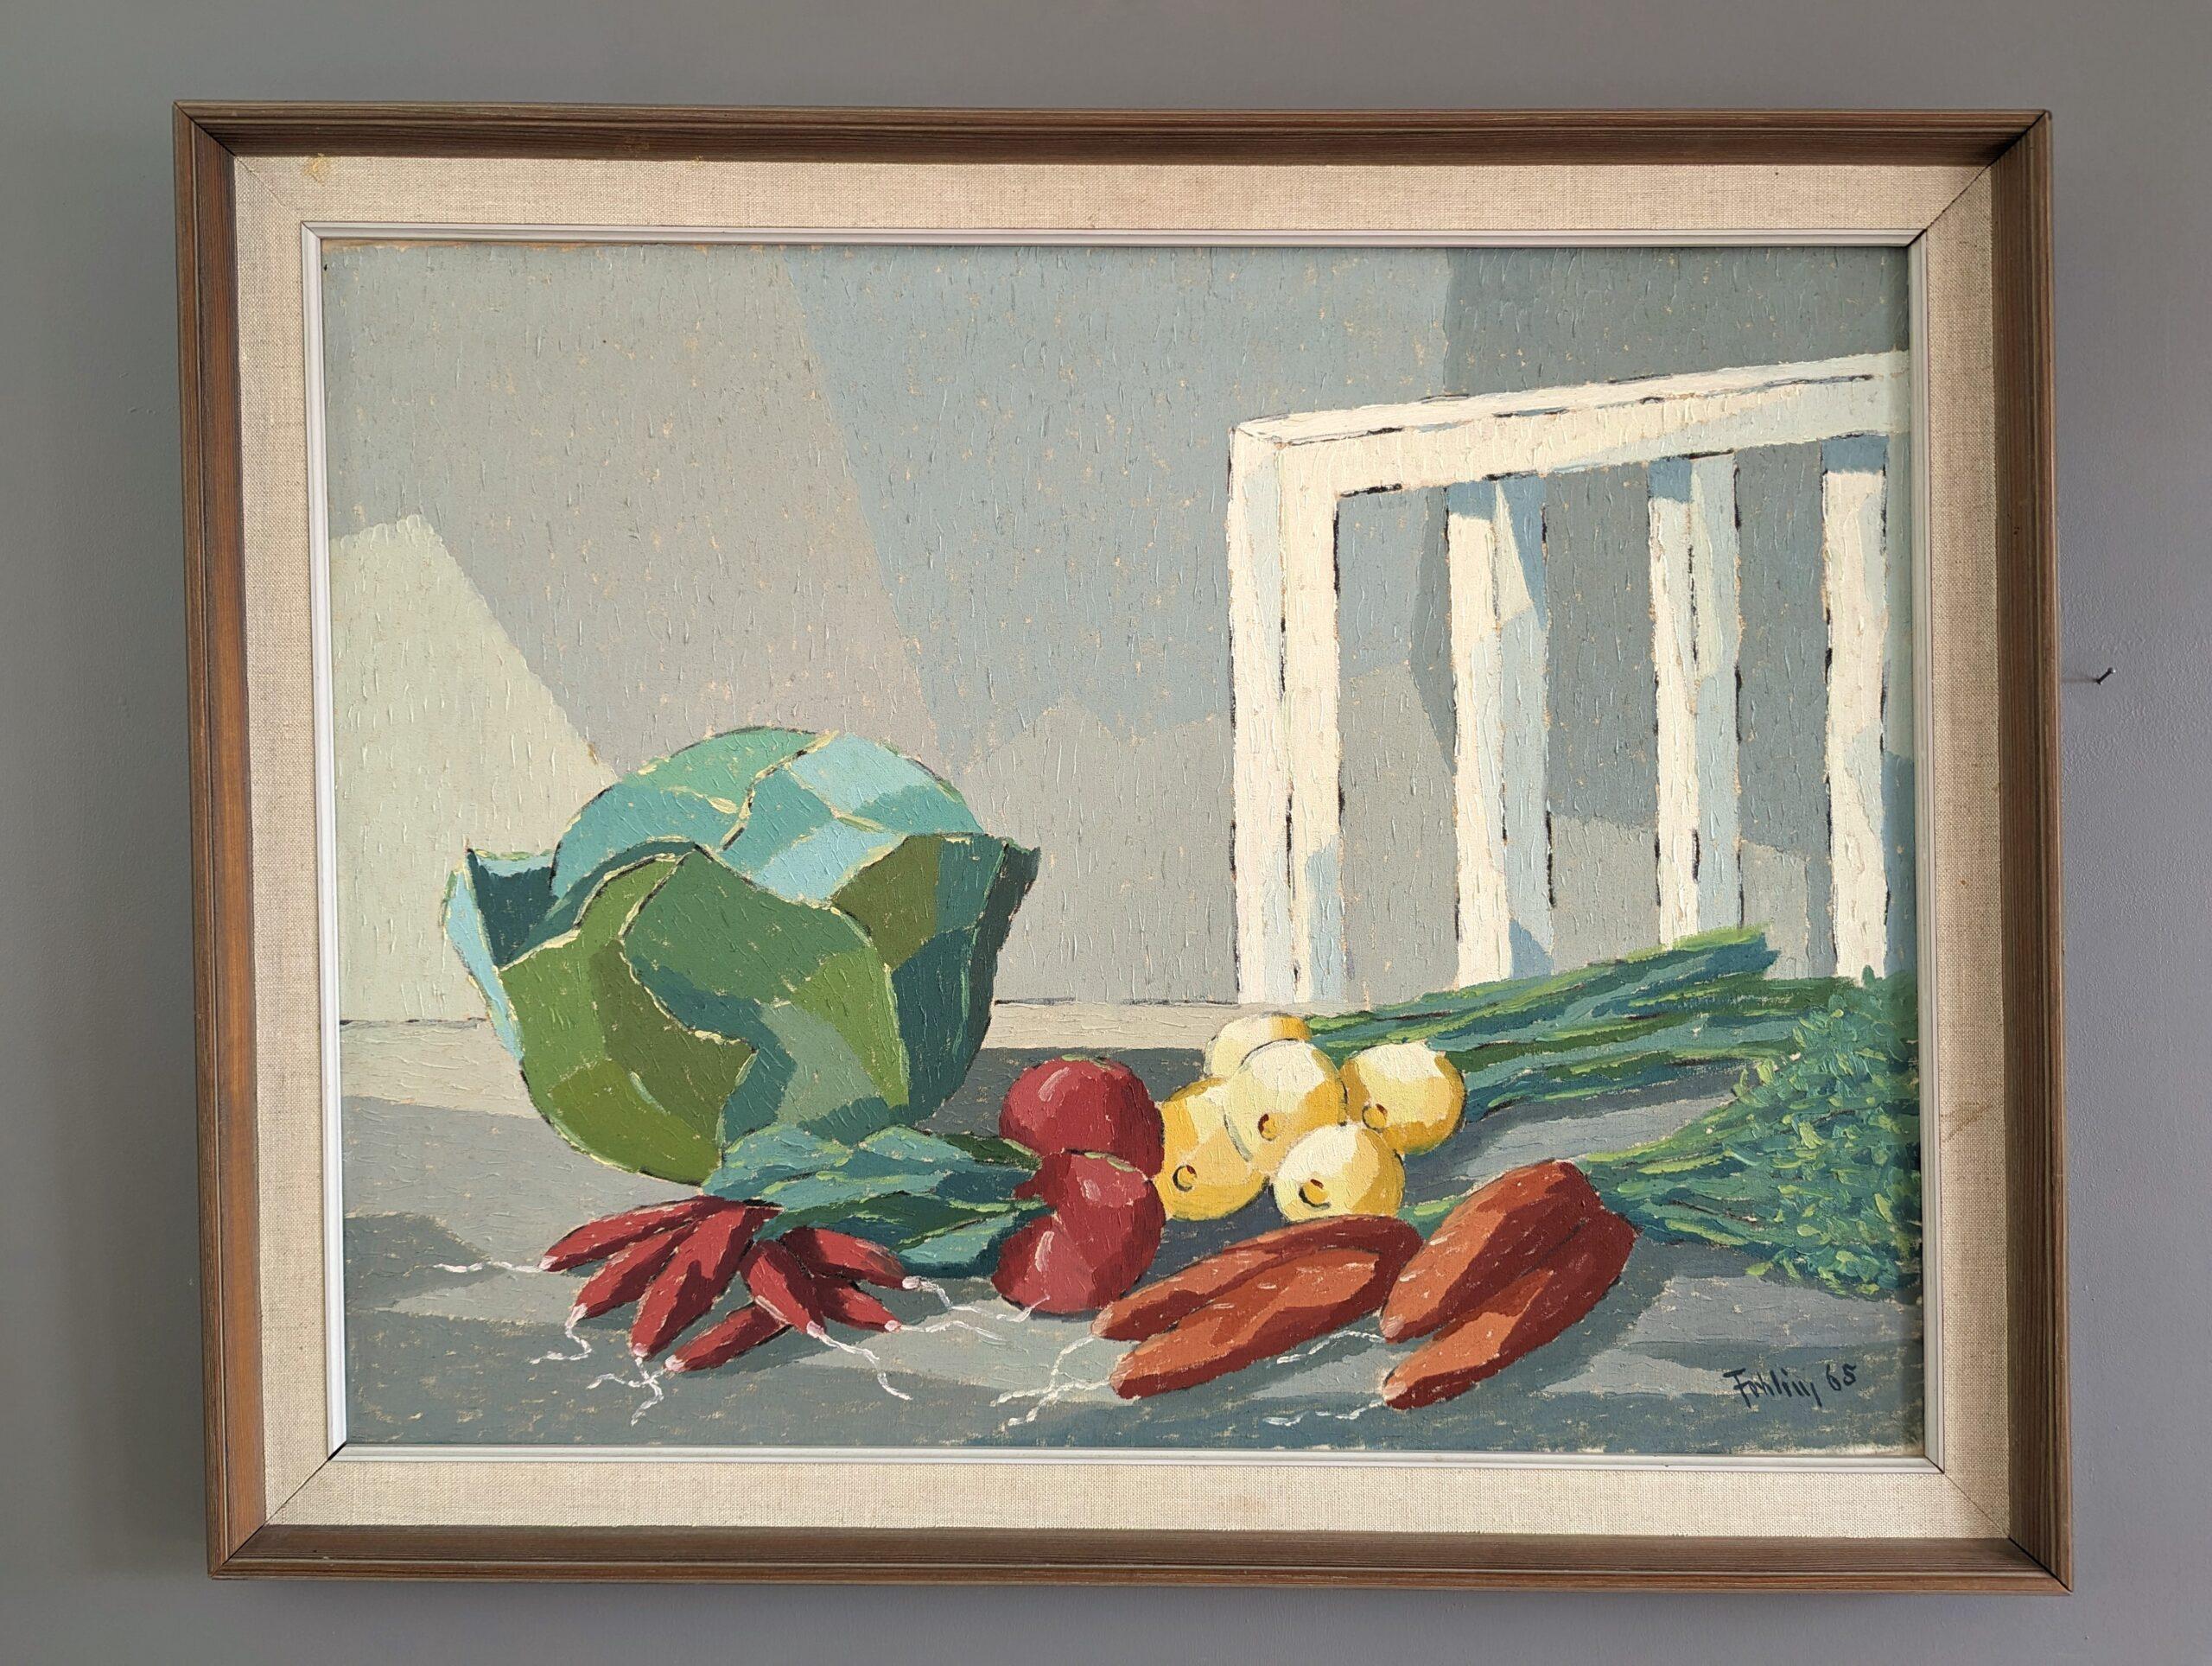 STILL LIFE WITH VEGETABLES
Size: 59 x 74 cm (including frame)
Oil on Canvas

A brilliantly executed modernist style still life composition, executed in oil onto canvas and dated 1965.

The artwork depicts a tabletop setting featuring an assortment